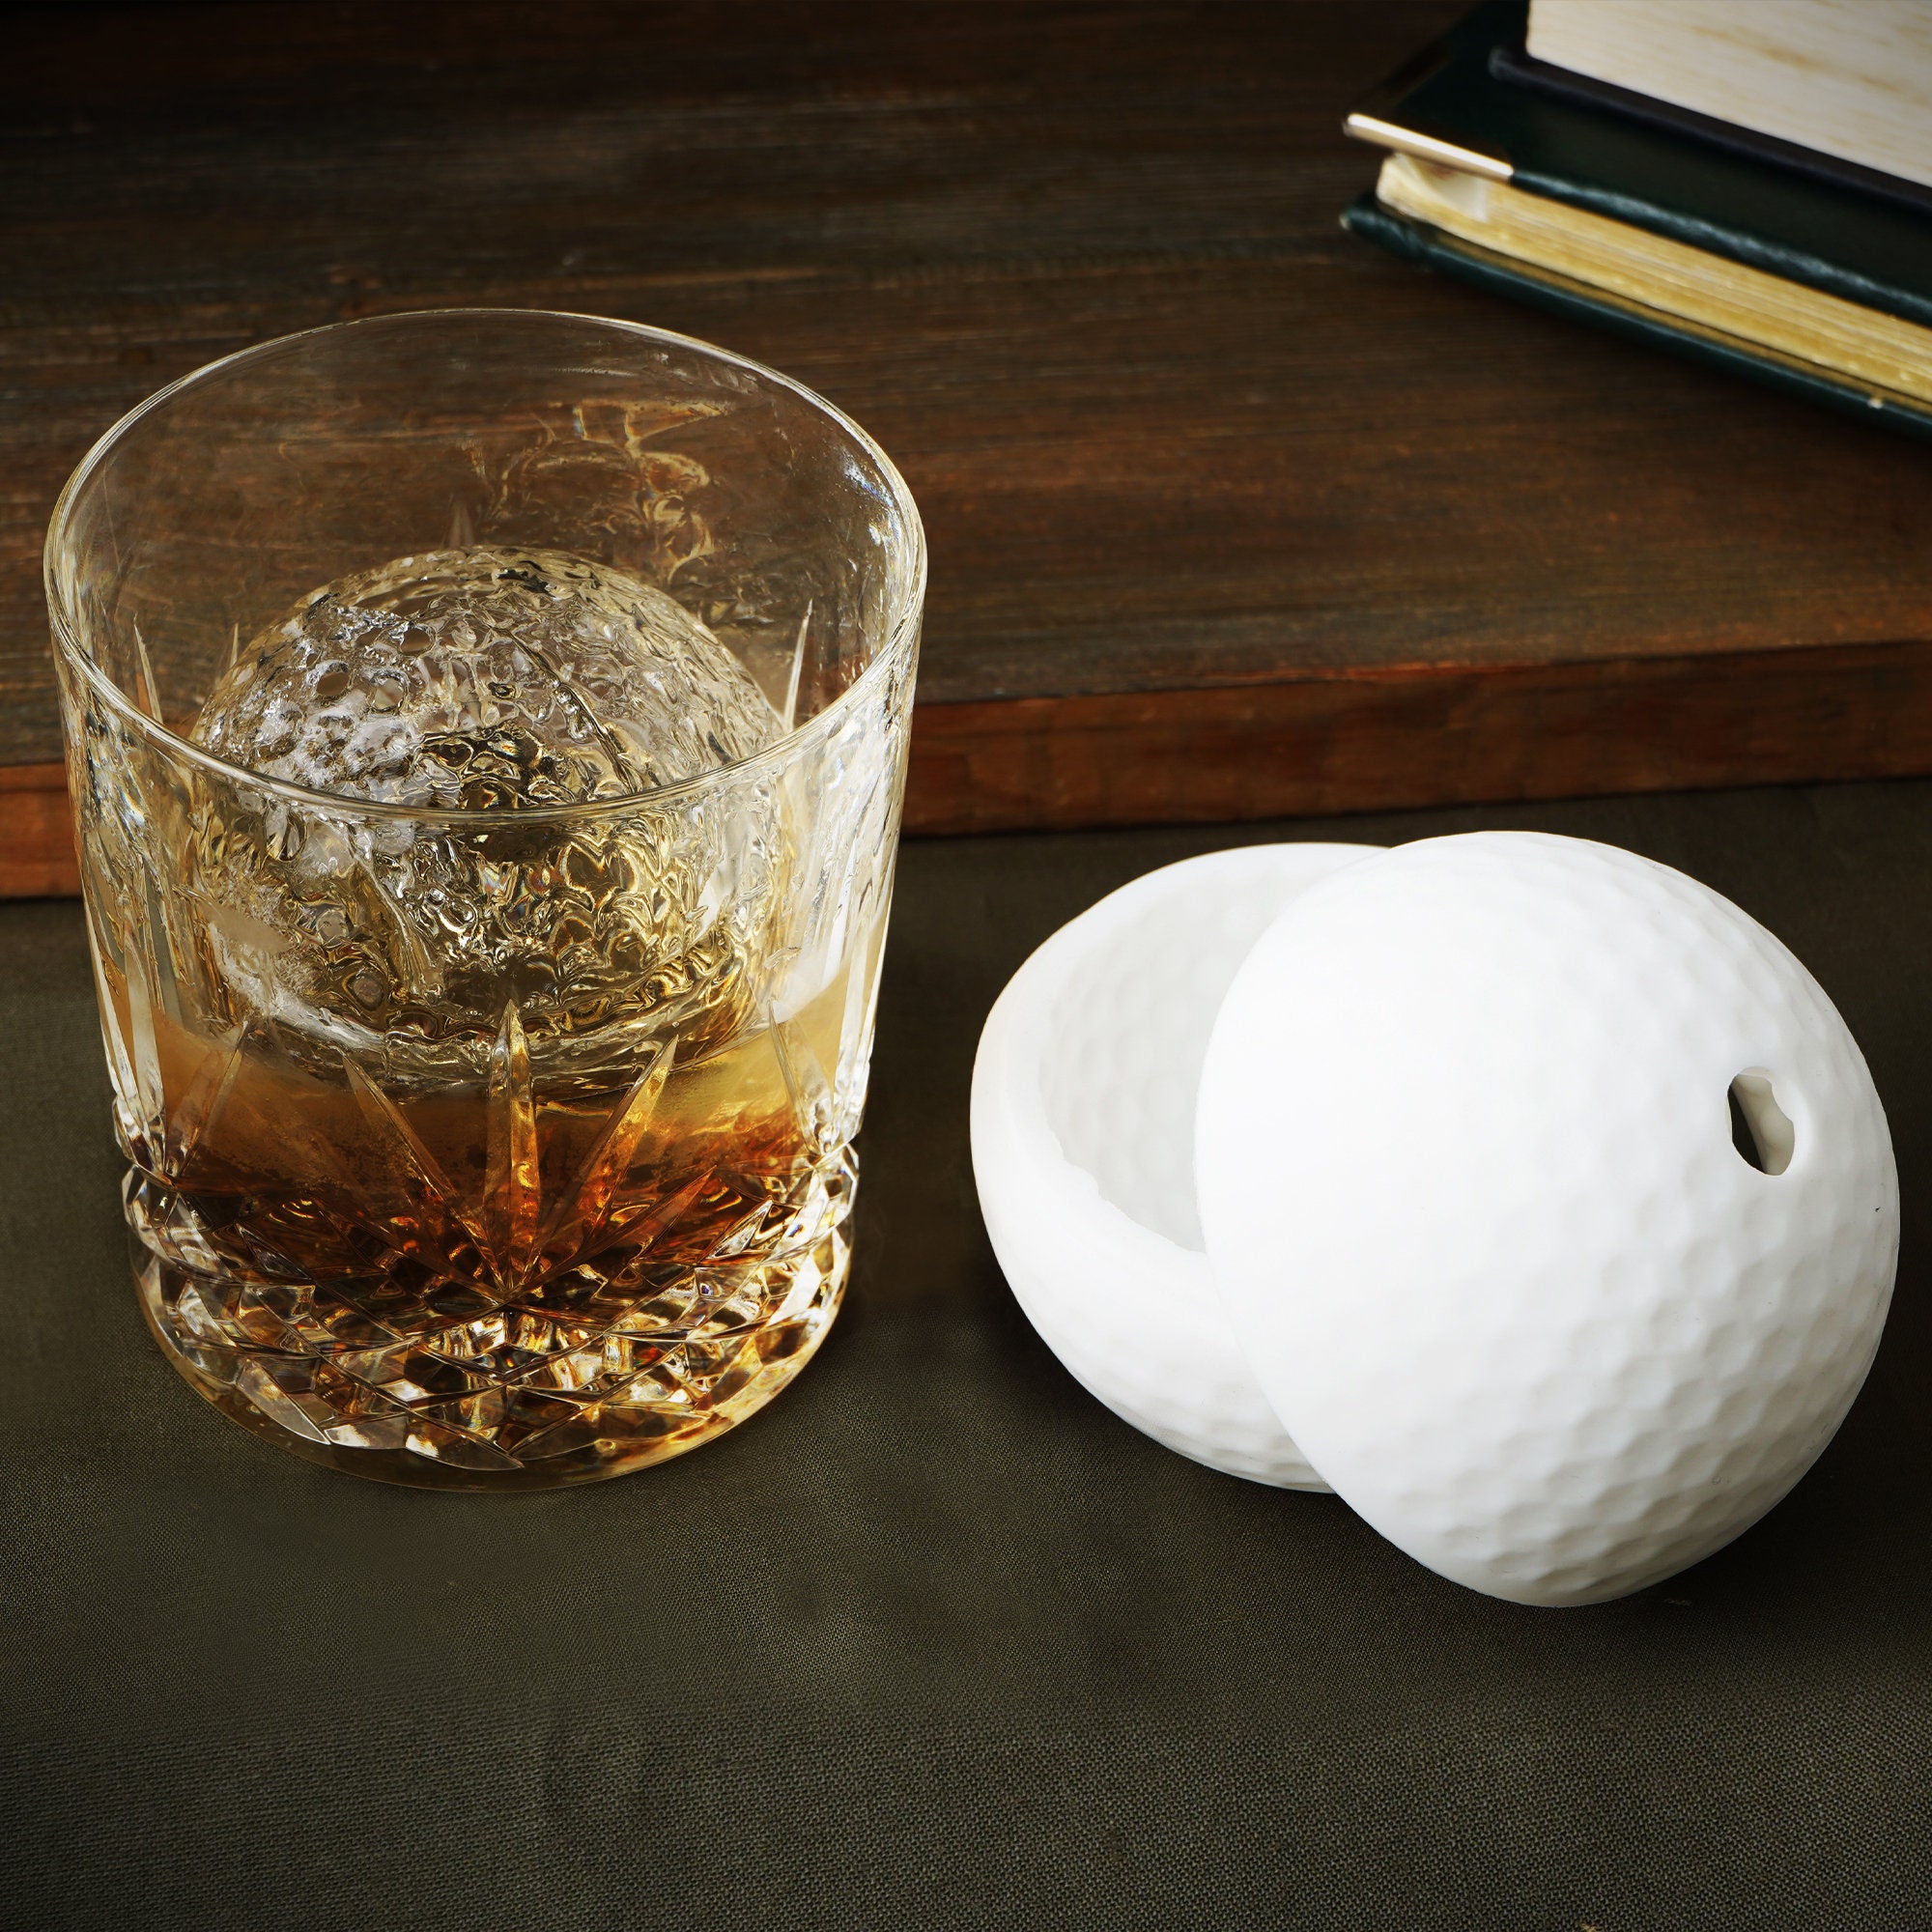 Large Ice Ball Maker Cube Tray Big Silicone Mold Sphere Whiskey Round Mould  ✯